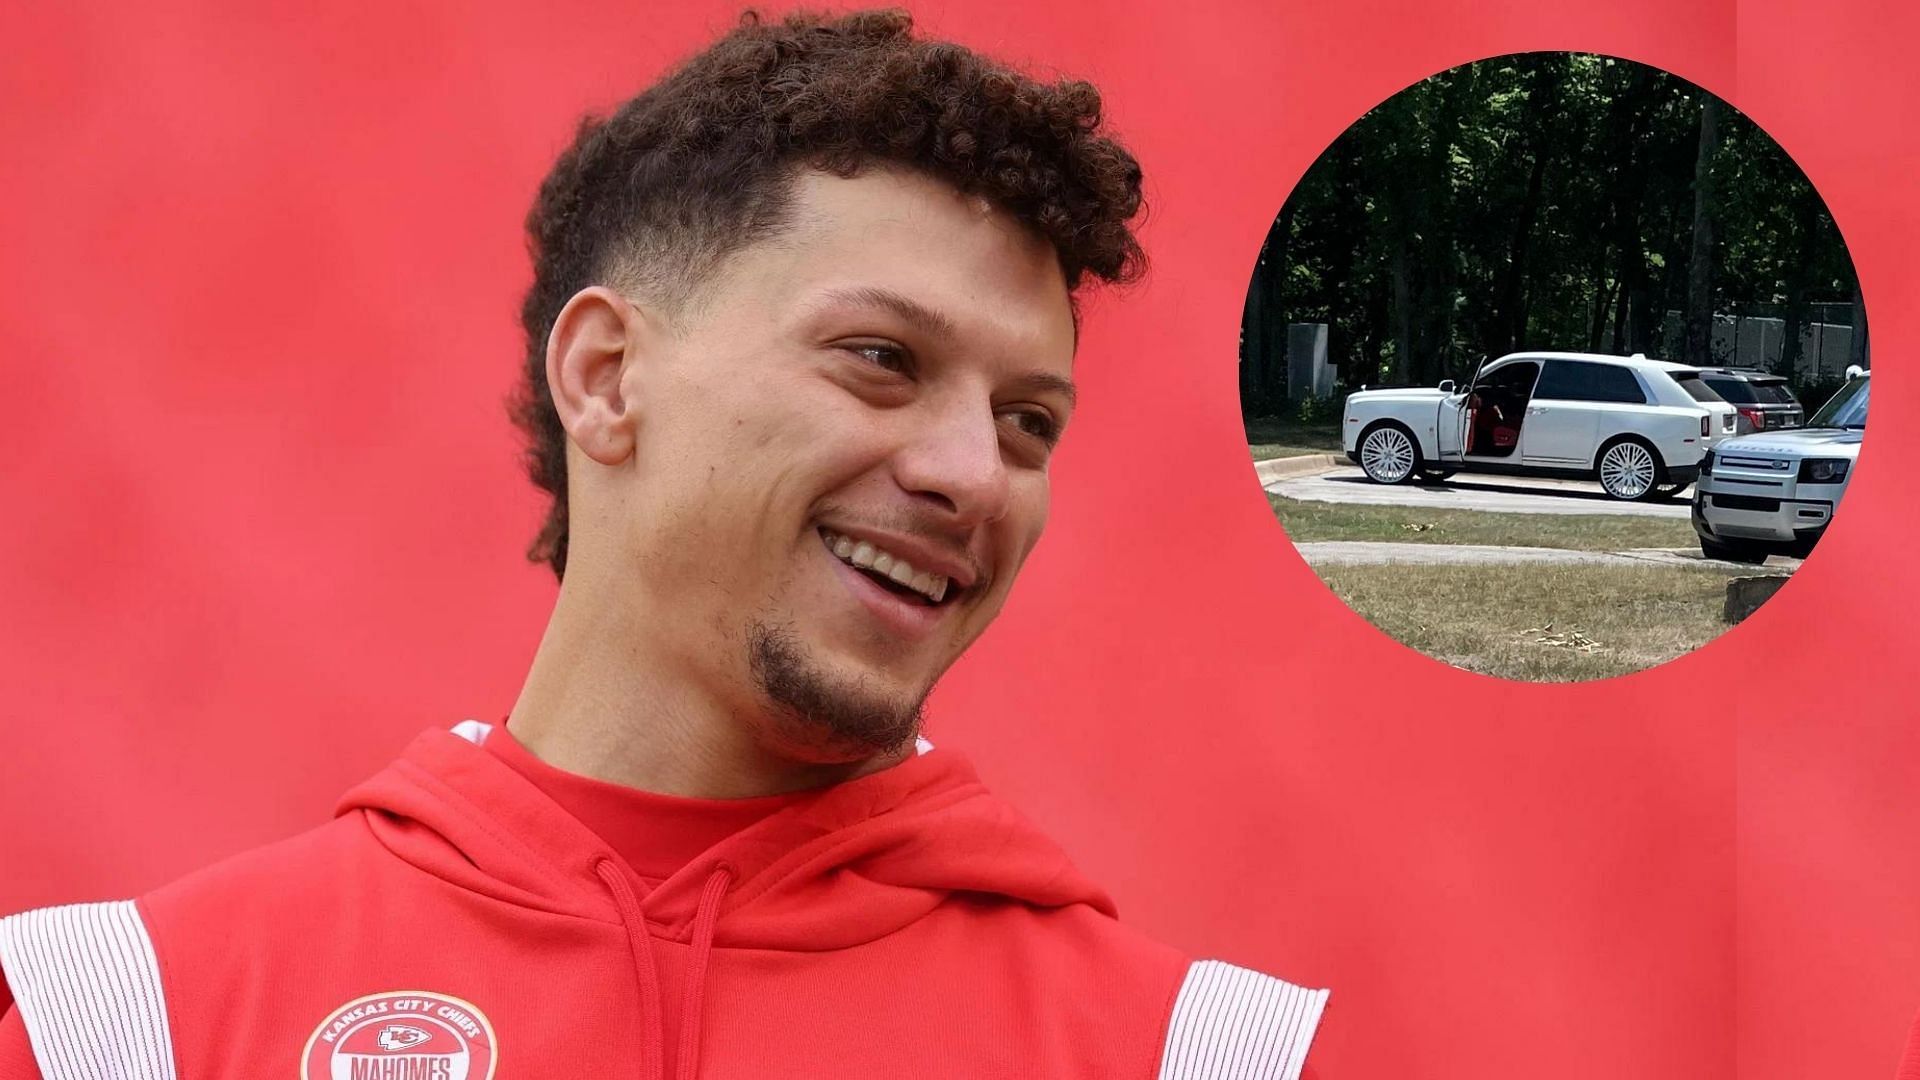 Patrick Mahomes has a Rolls Royce Cullinan in his car collection